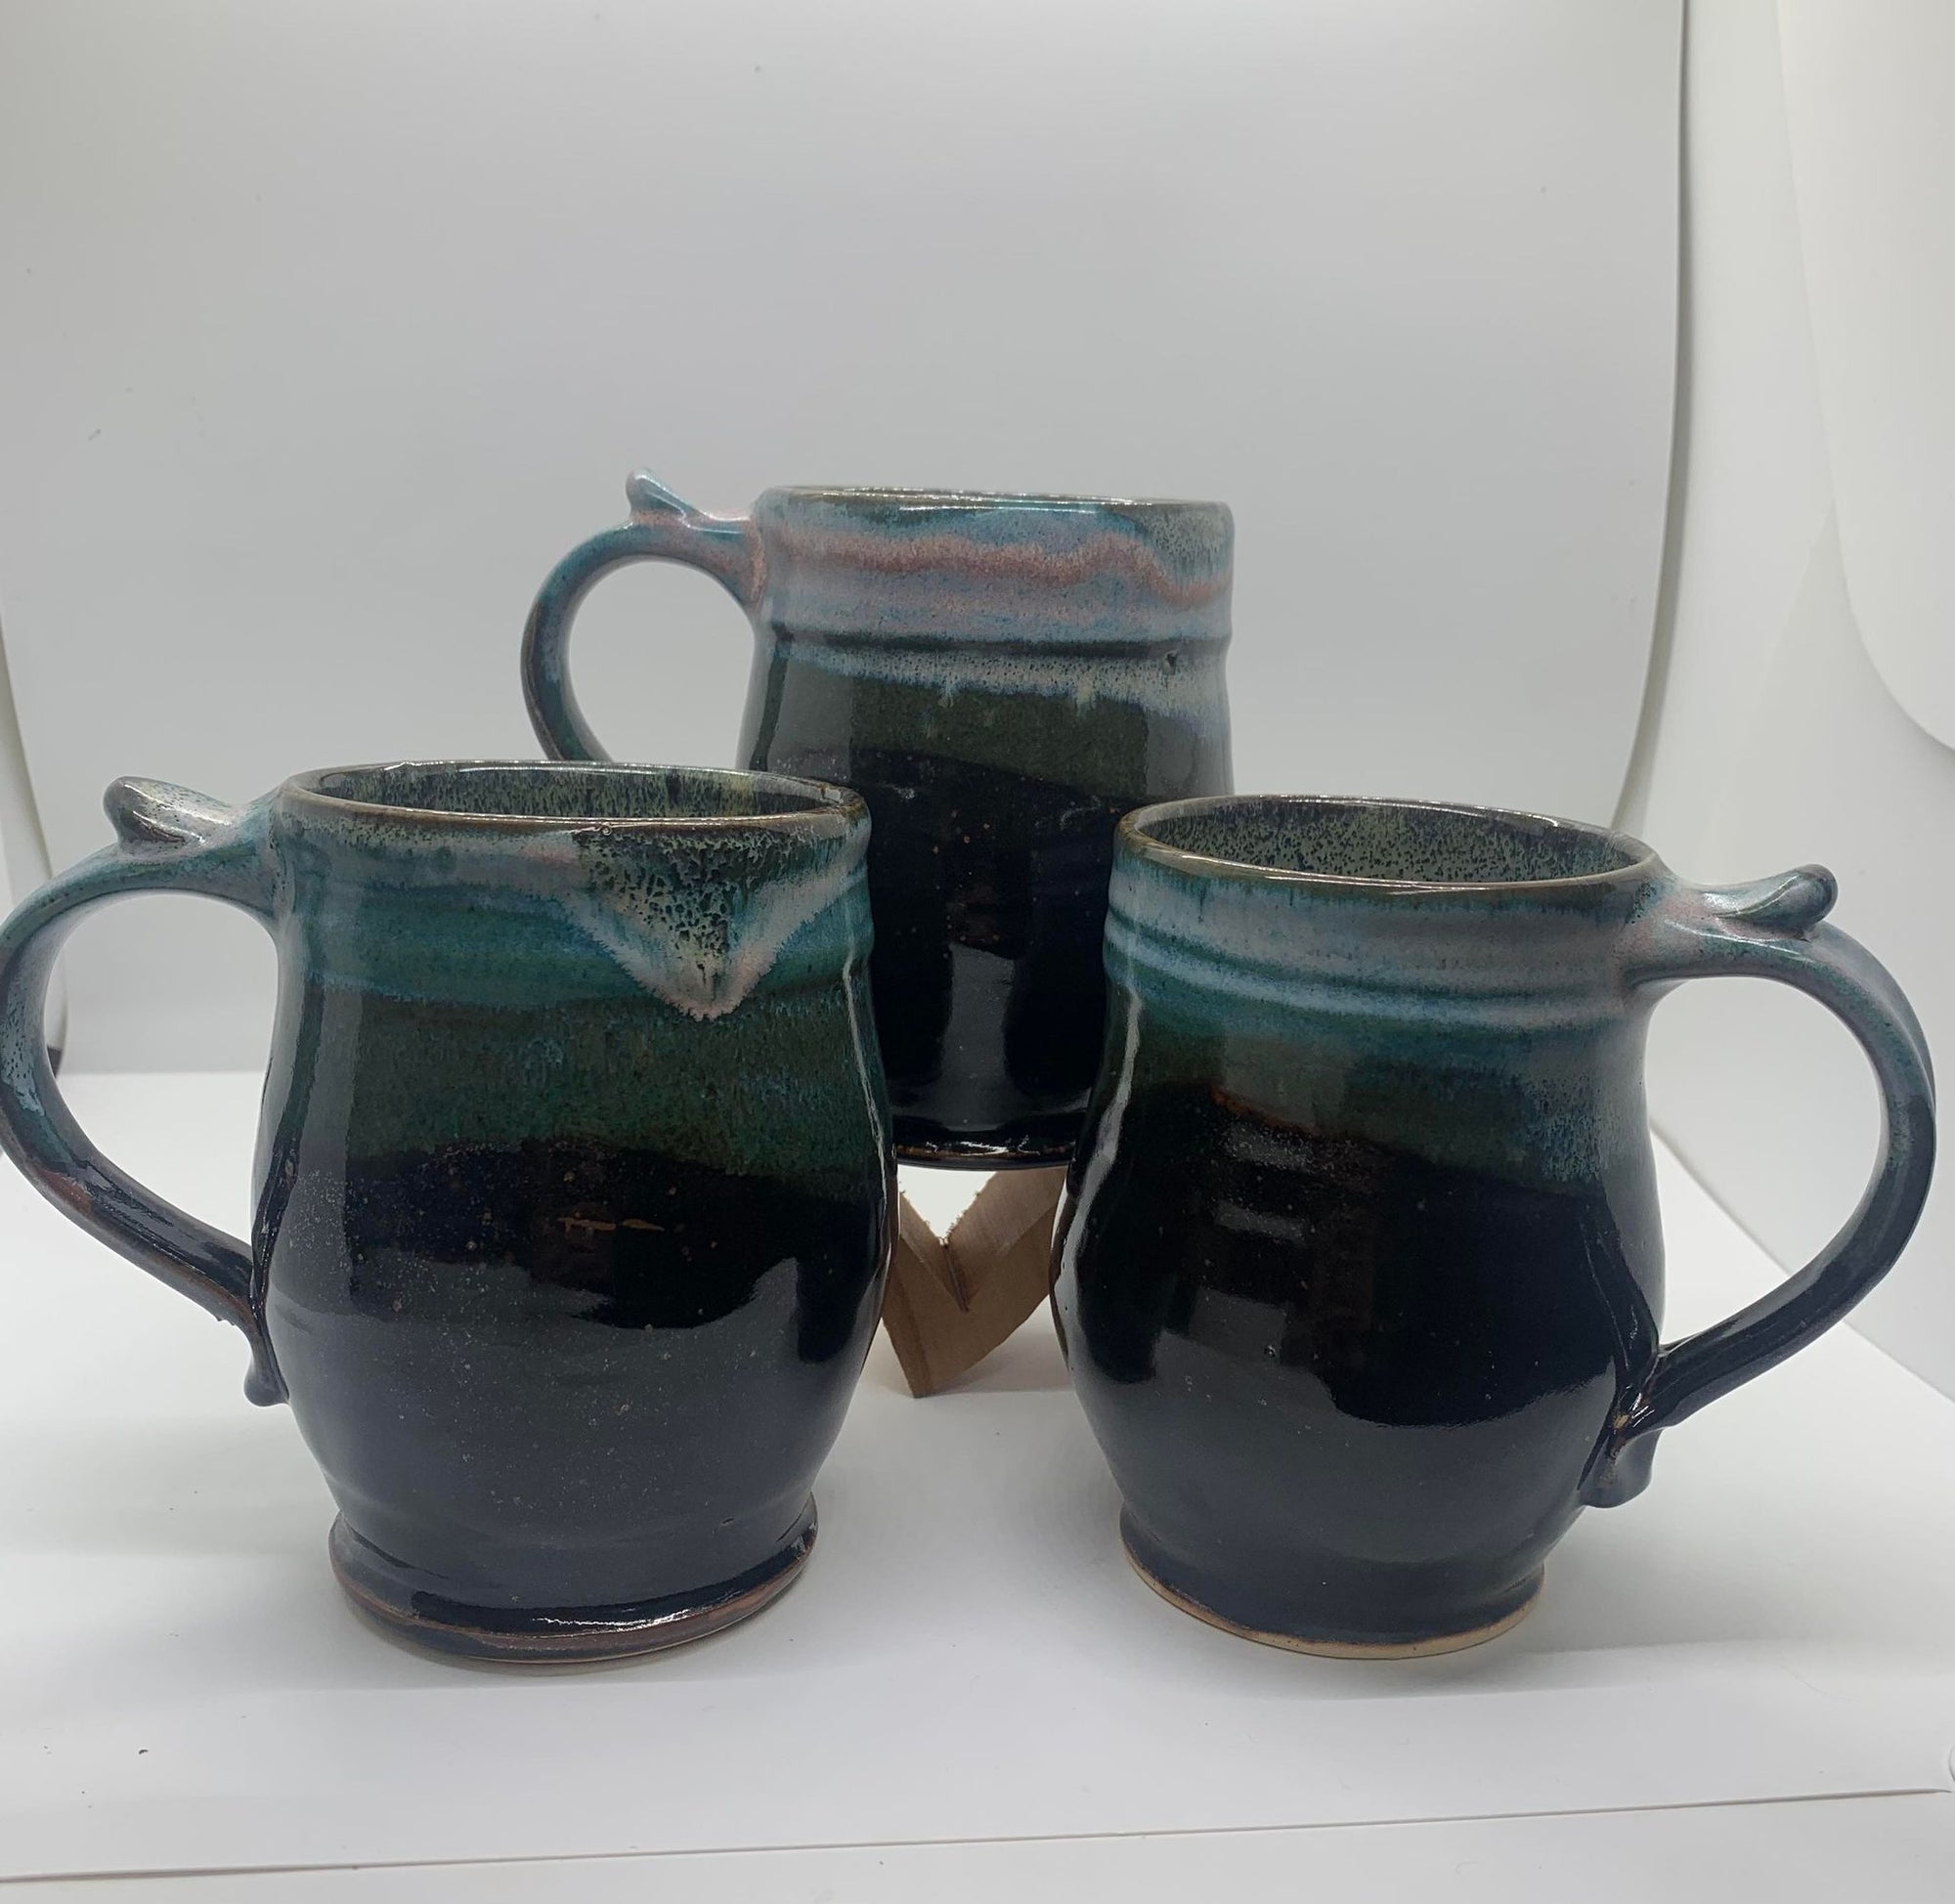 Three Perry Munn Pottery mugs sold as a set, sitting on a table.